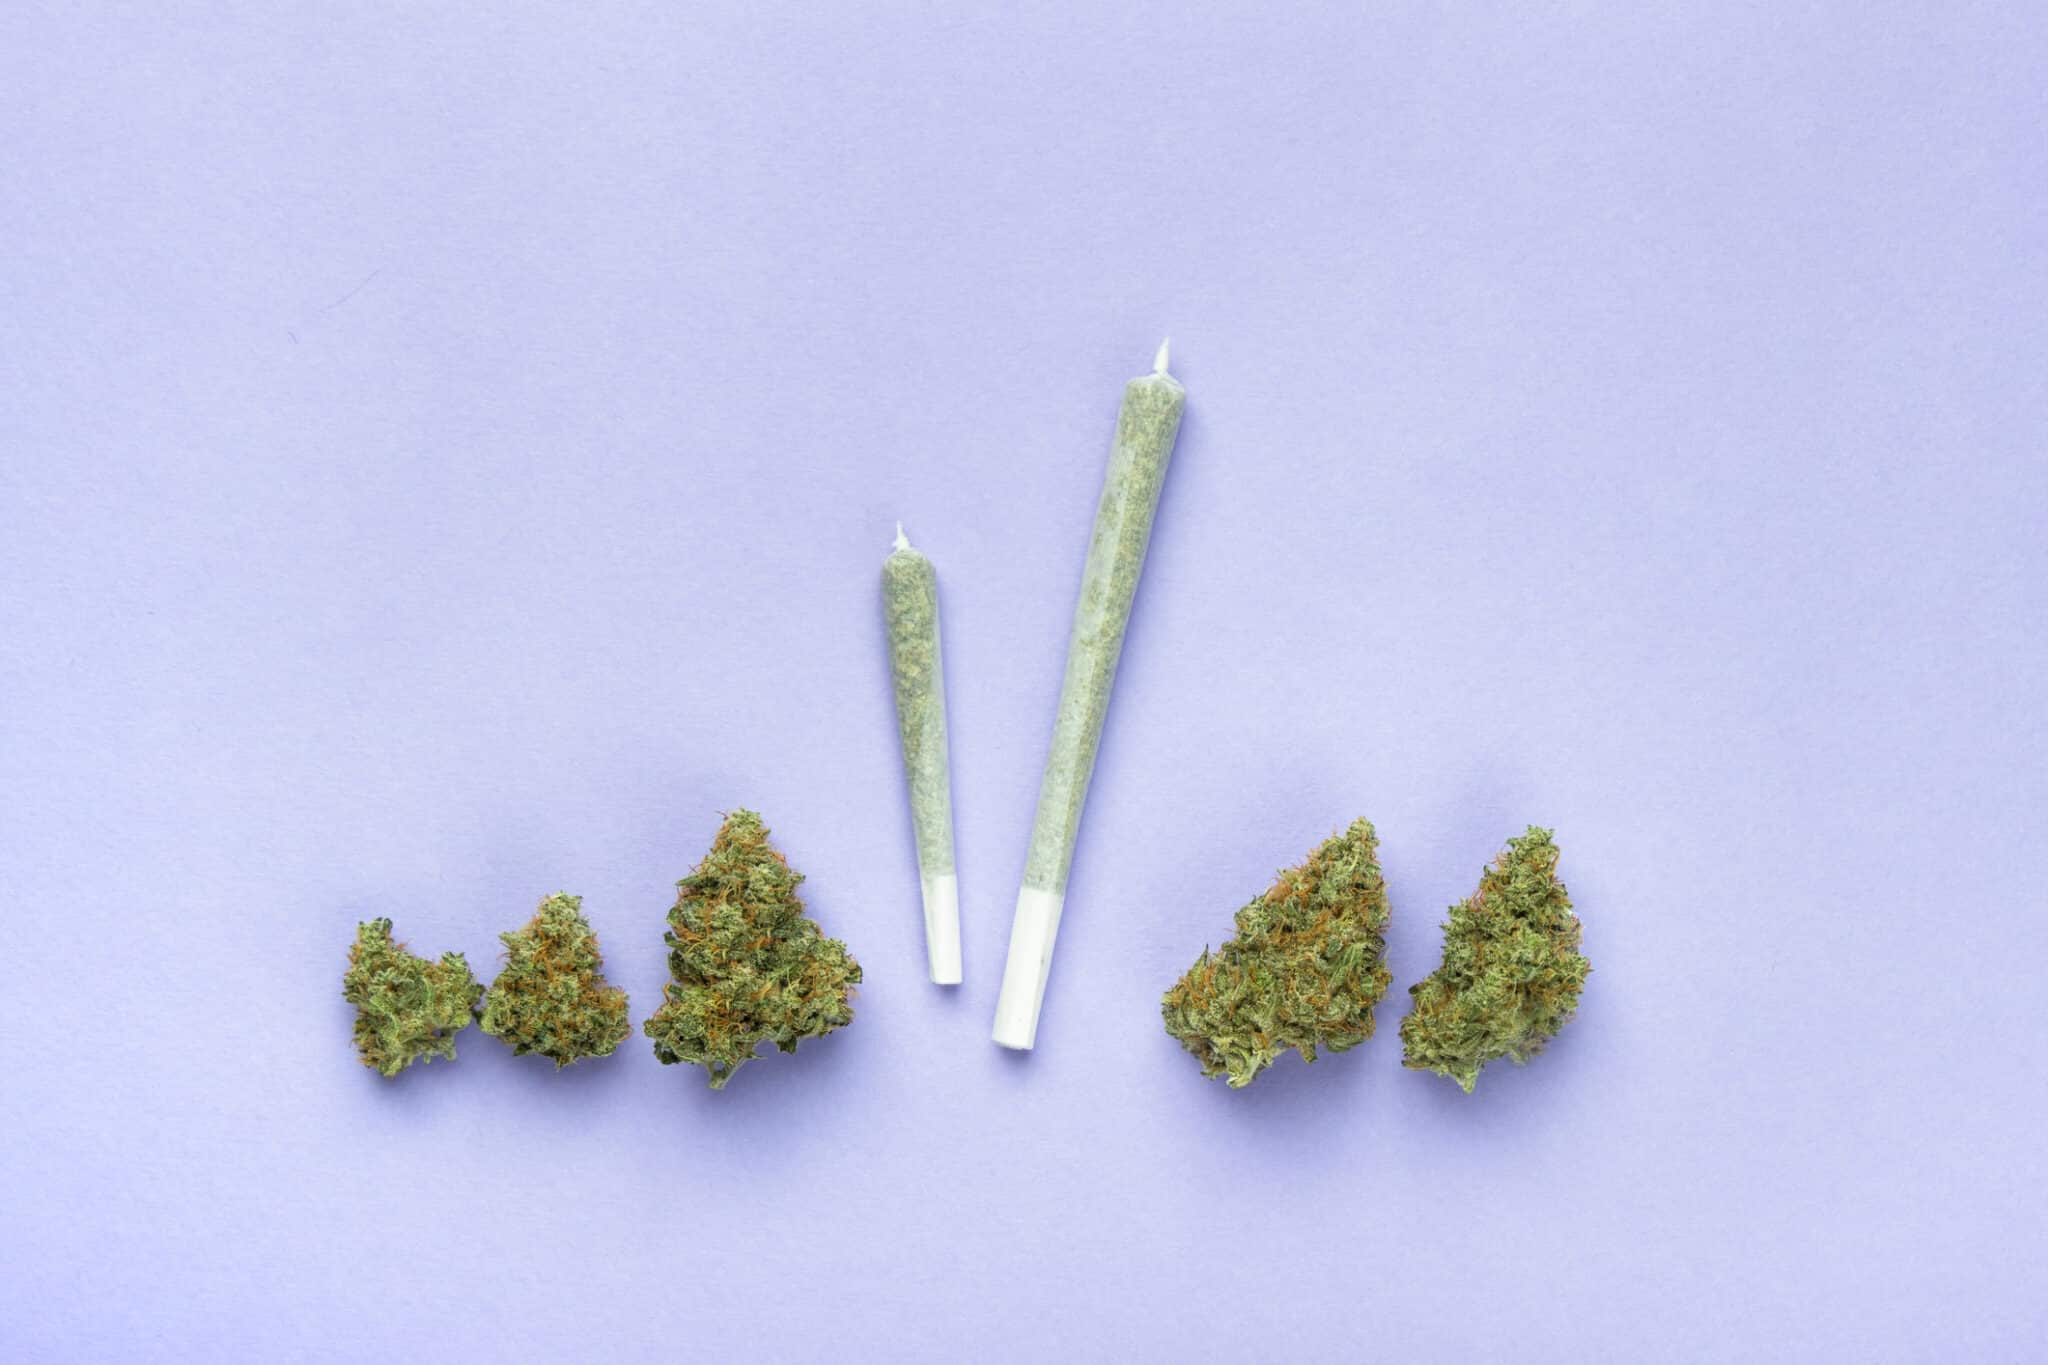 5 Cannabis strains next to two joints.